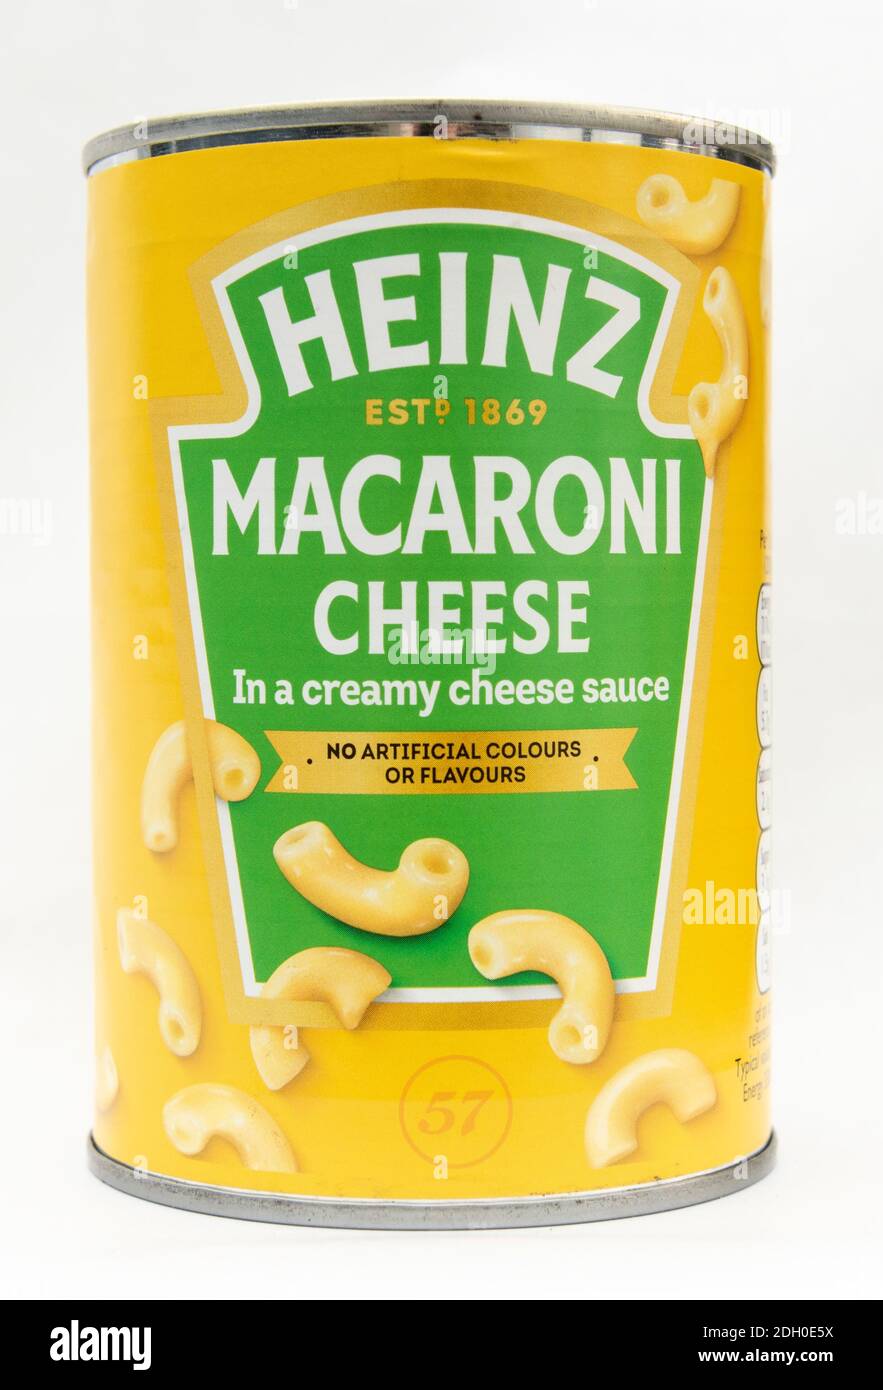 A can of Heinz Macaroni Cheese close up on a white background Stock Photo